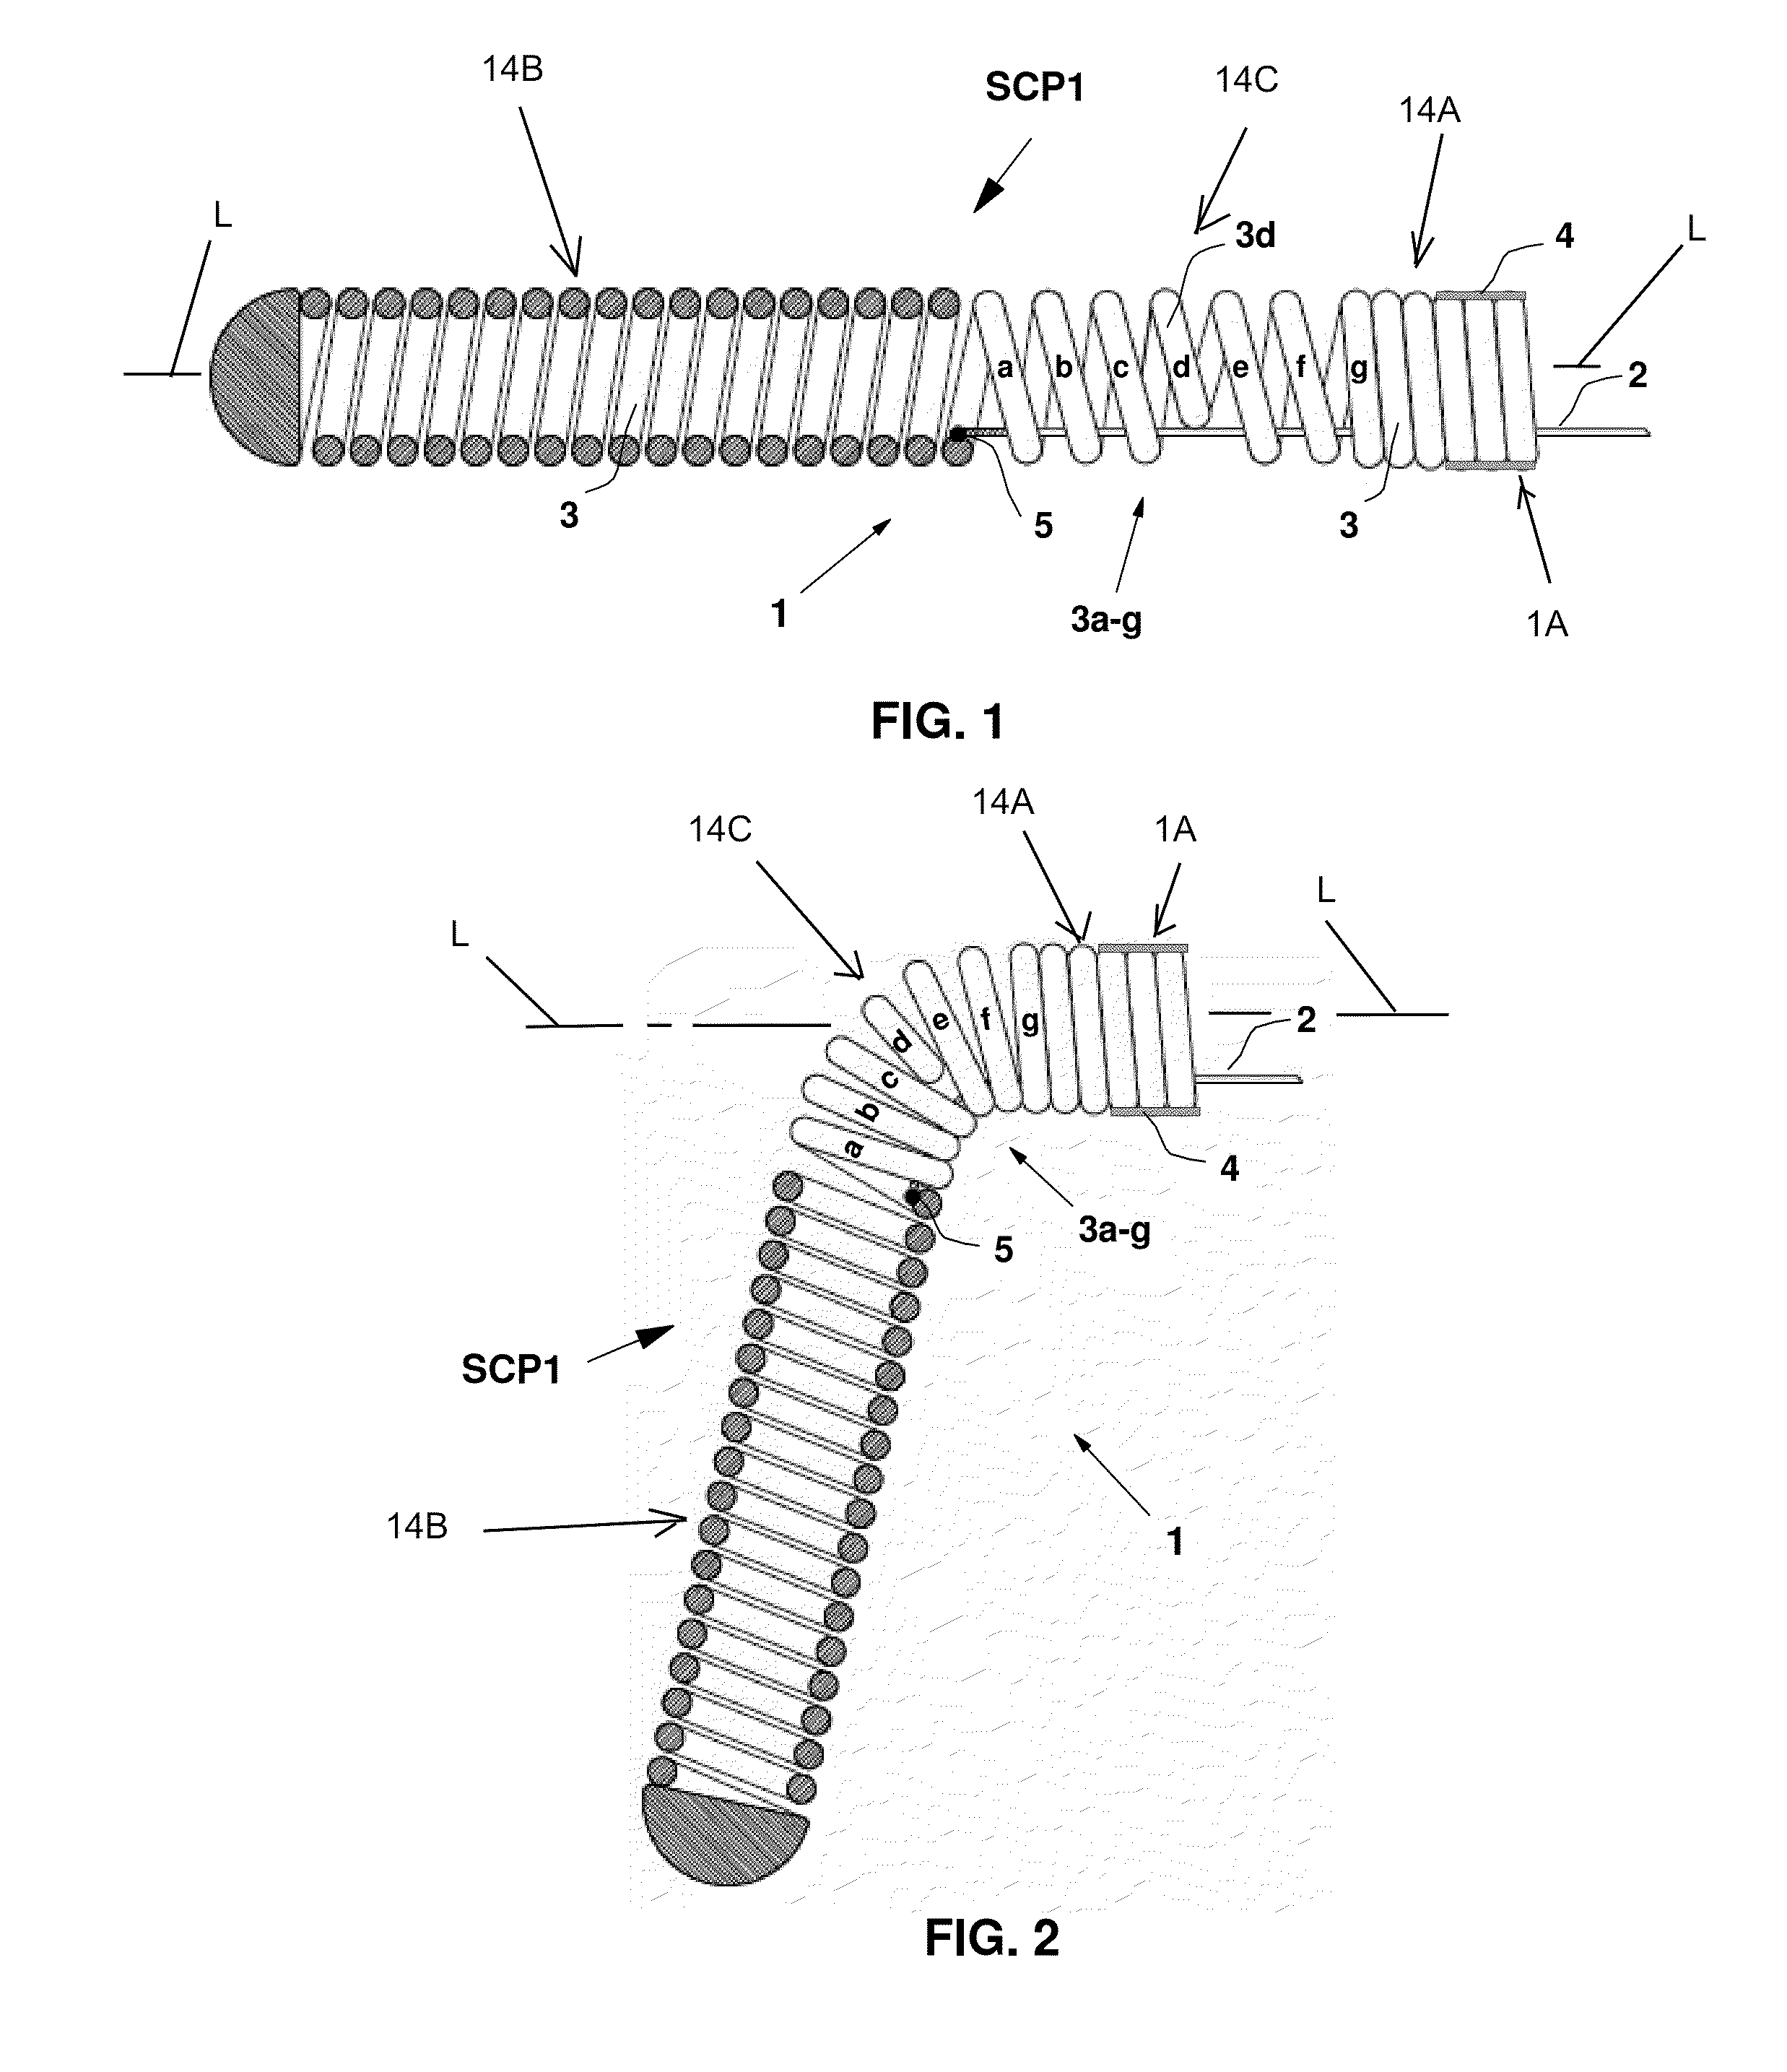 Steerable Multifunction Catheter Probe with High Guidability and Reversible Rigidity